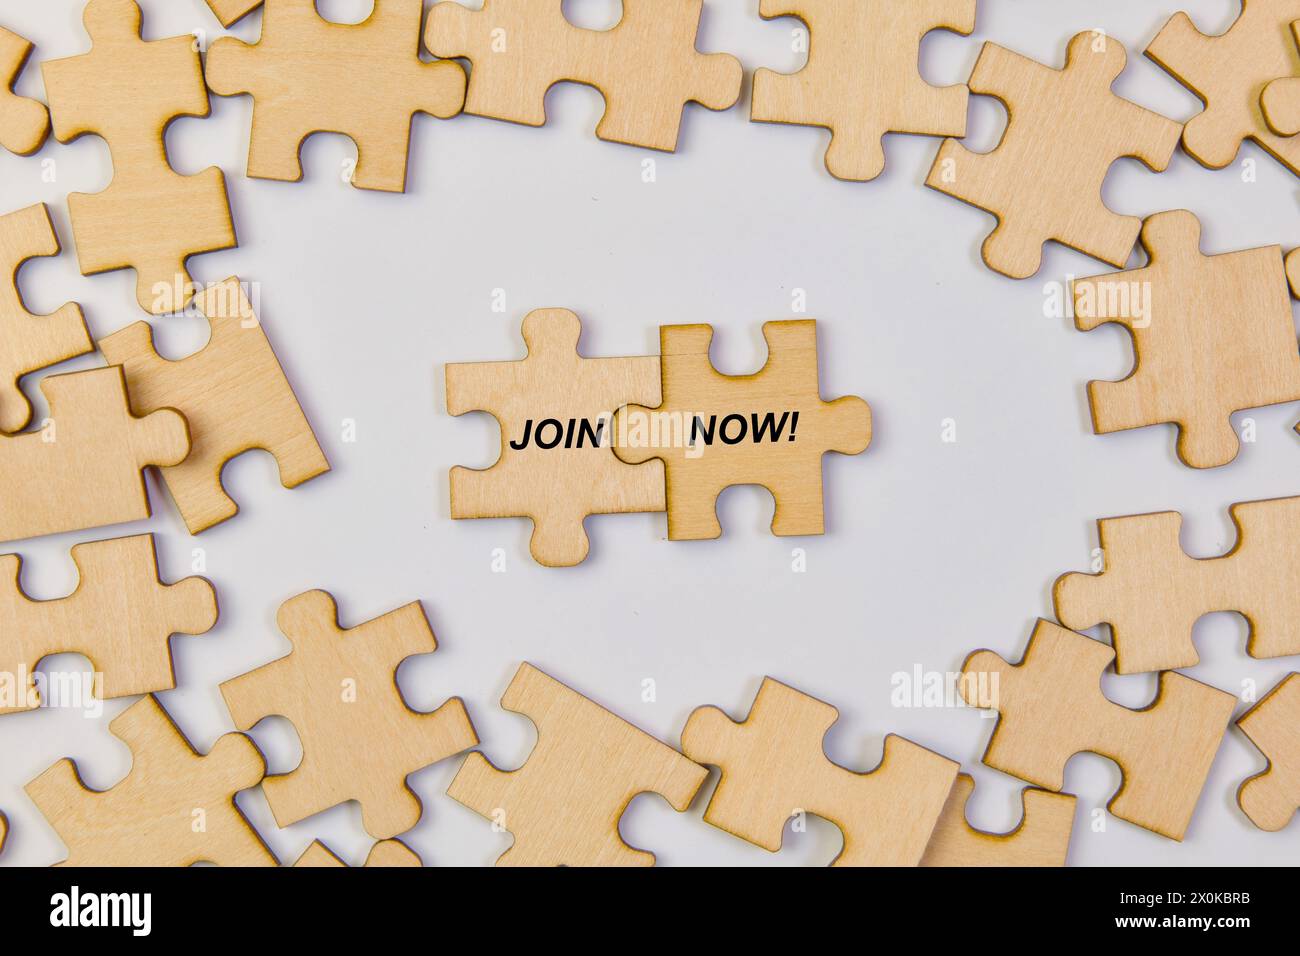 Compelling image featuring interlocking wooden puzzle pieces coming together to form a JOIN NOW inscription Stock Photo